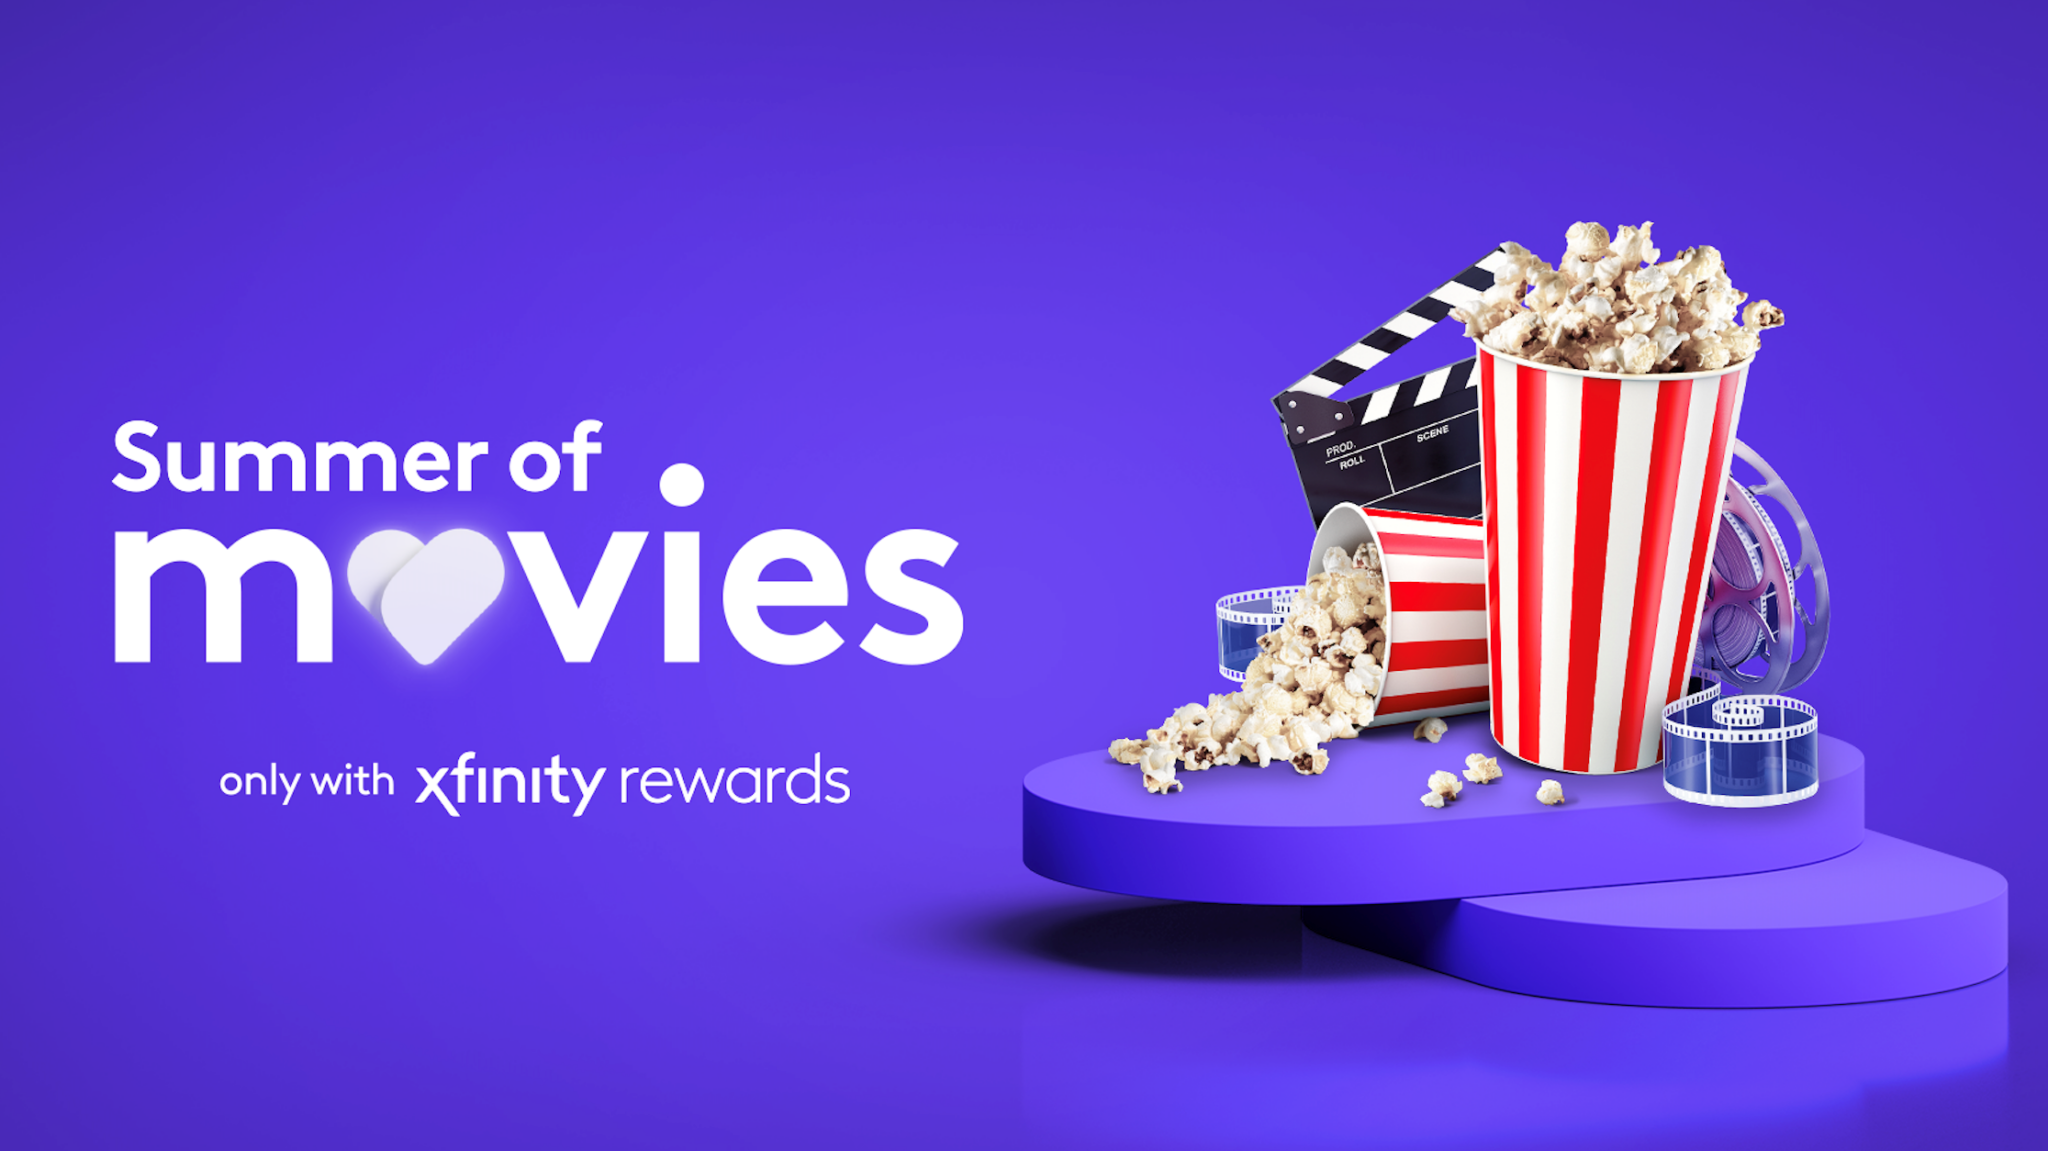 XFINITY “Summer of Movies” is Back in Florida with Tons of Free